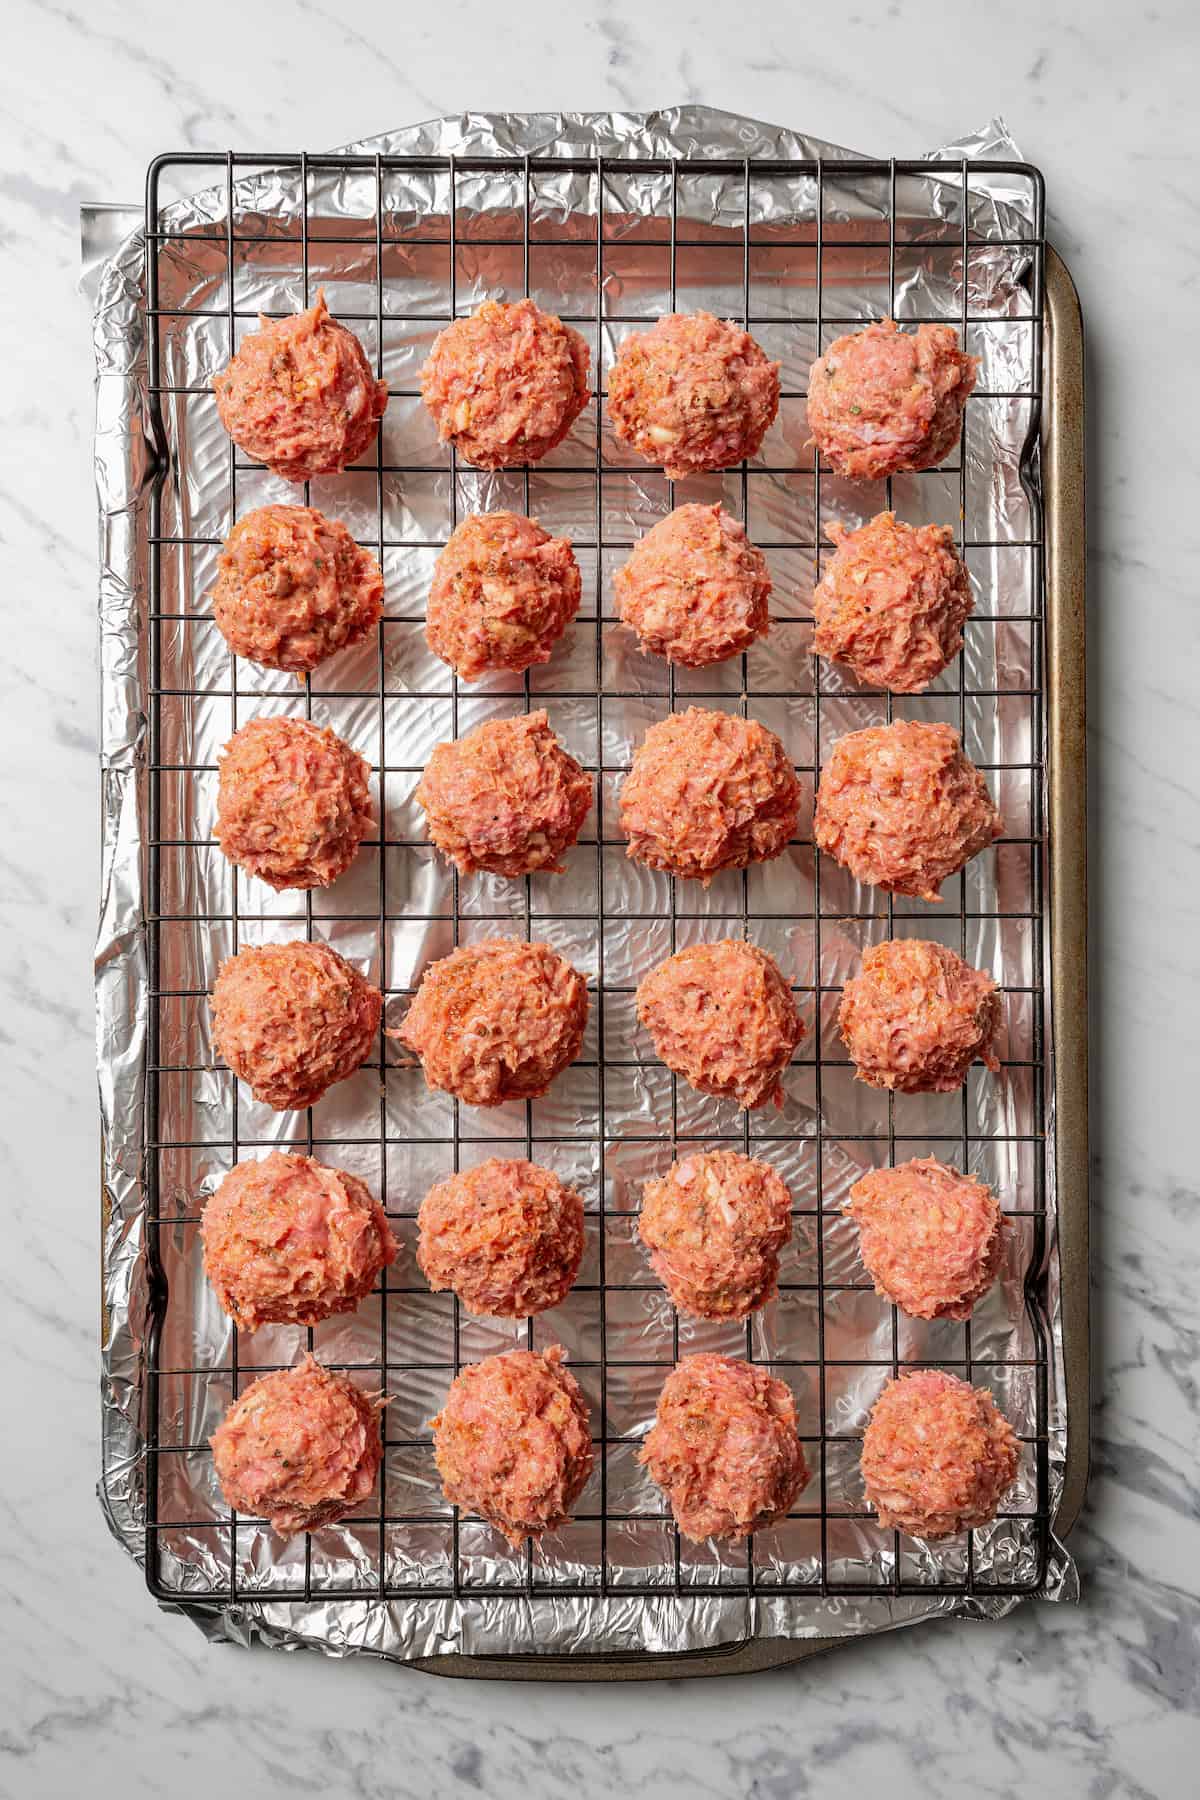 Uncooked turkey meatballs on a wire rack set over a baking pan.